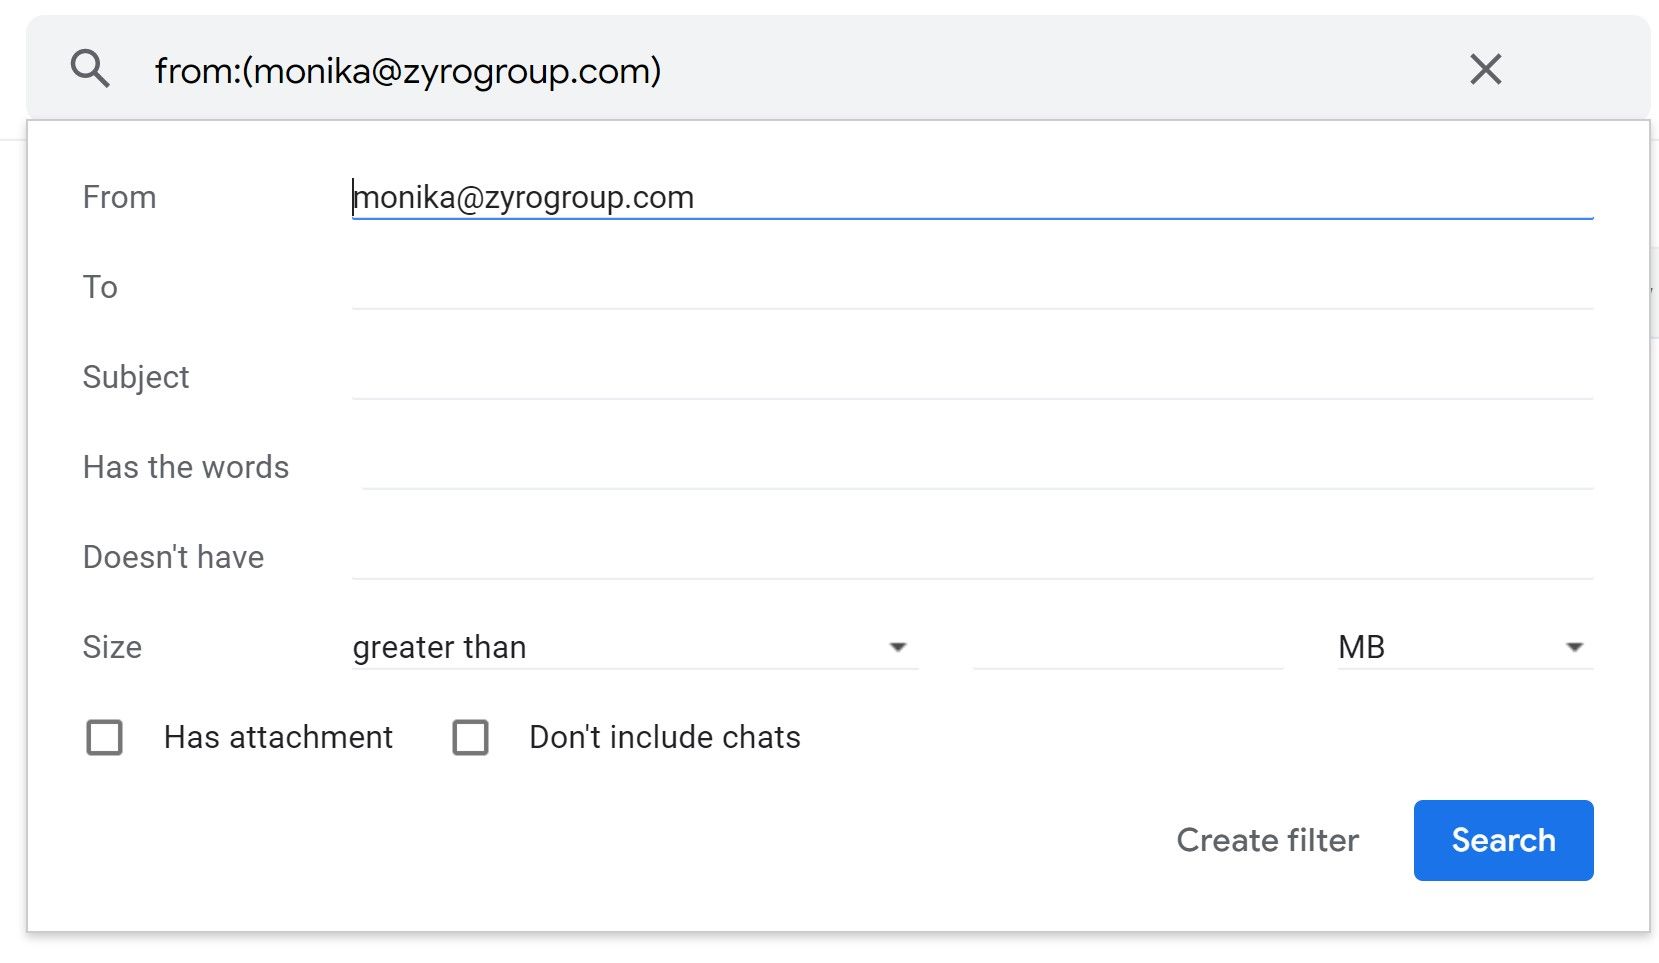 Filtering message options in Gmail